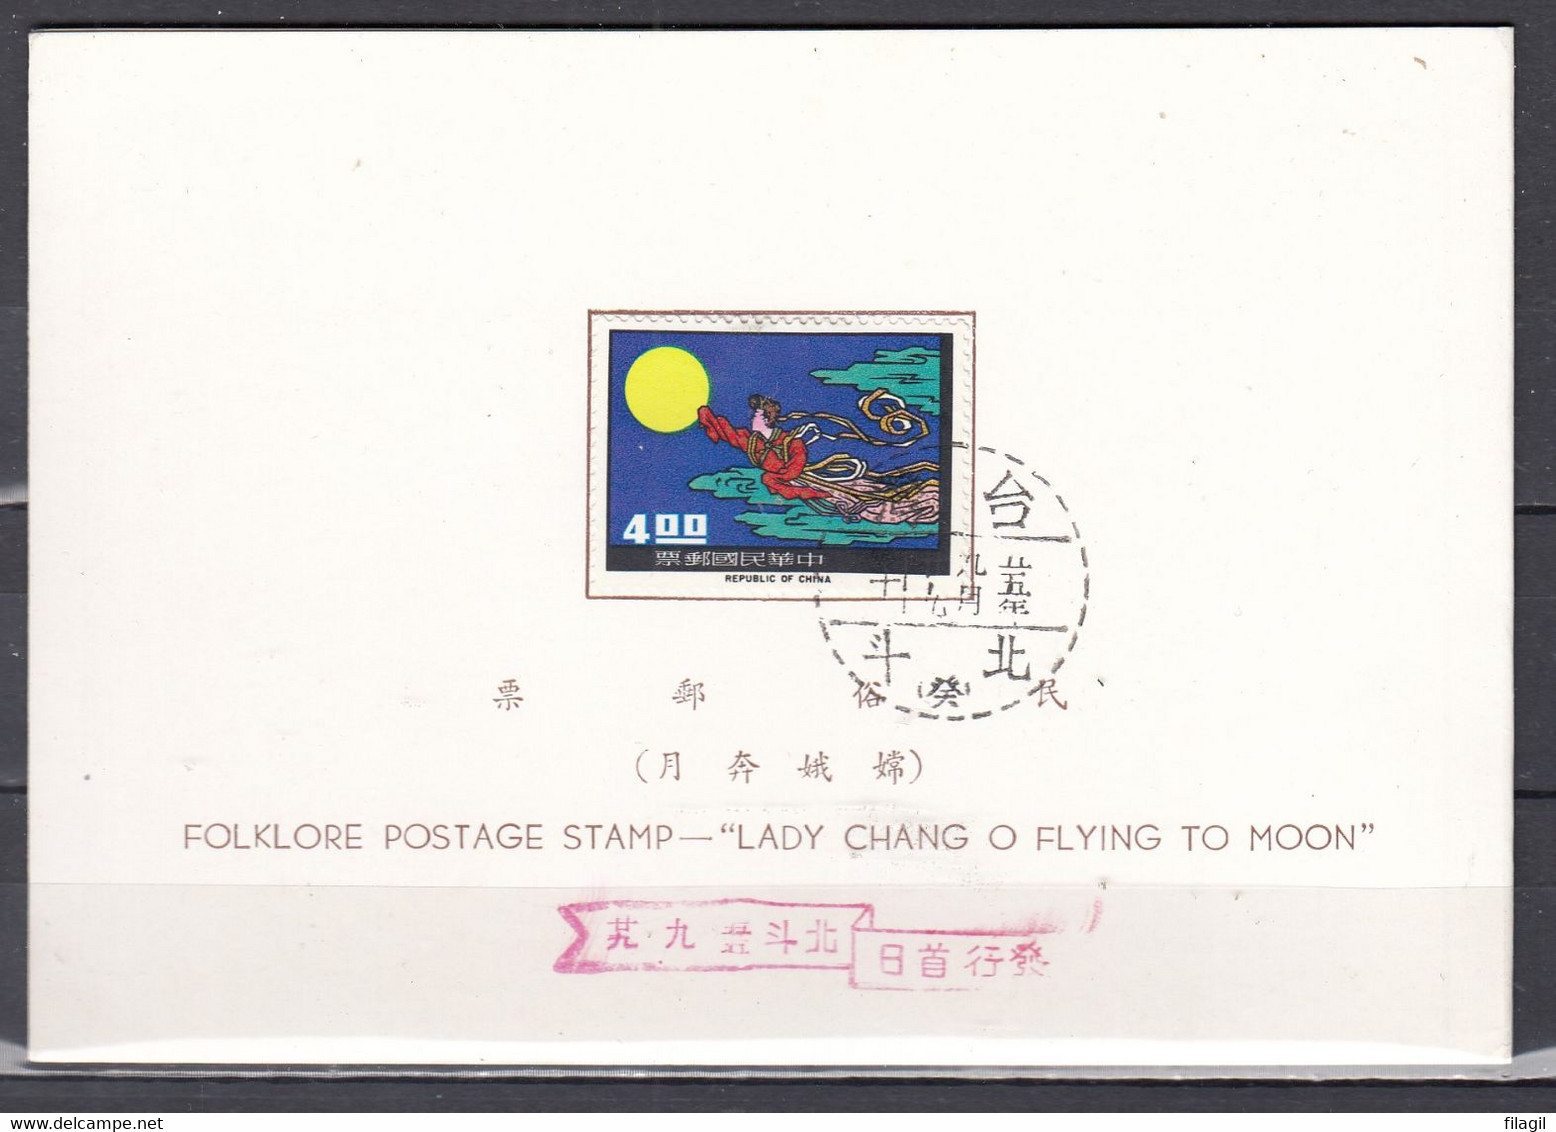 Boekje Van Folklore Postage Stamp Lady Chang O Flying To Moon - Covers & Documents